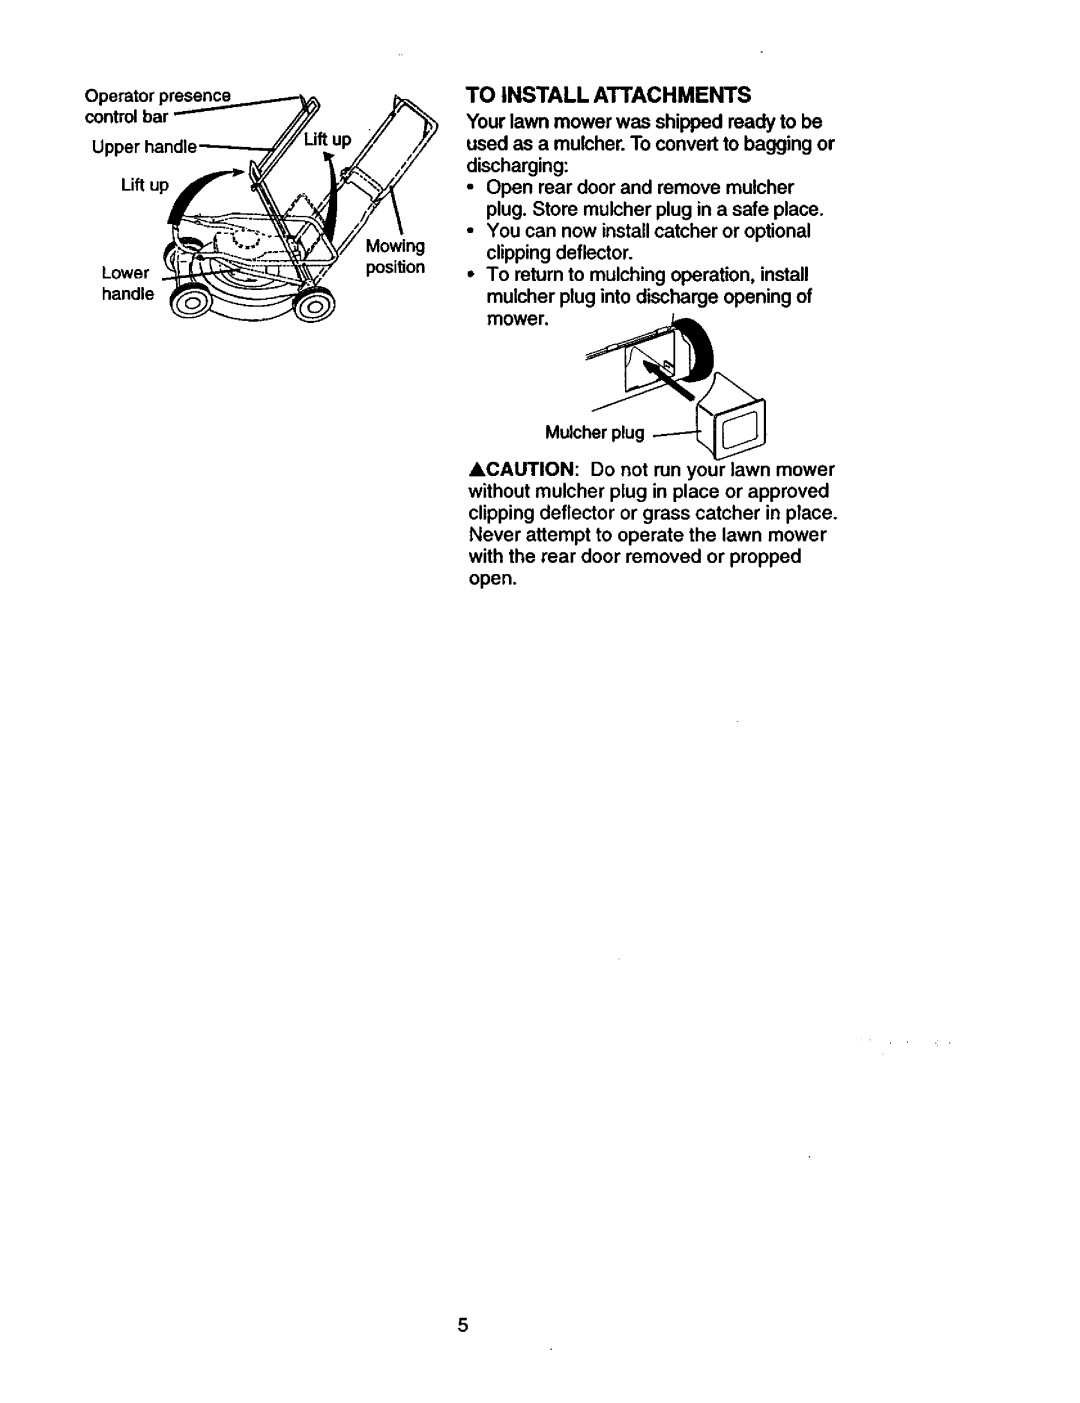 Craftsman 917.387402 owner manual To Install Attachments, open 